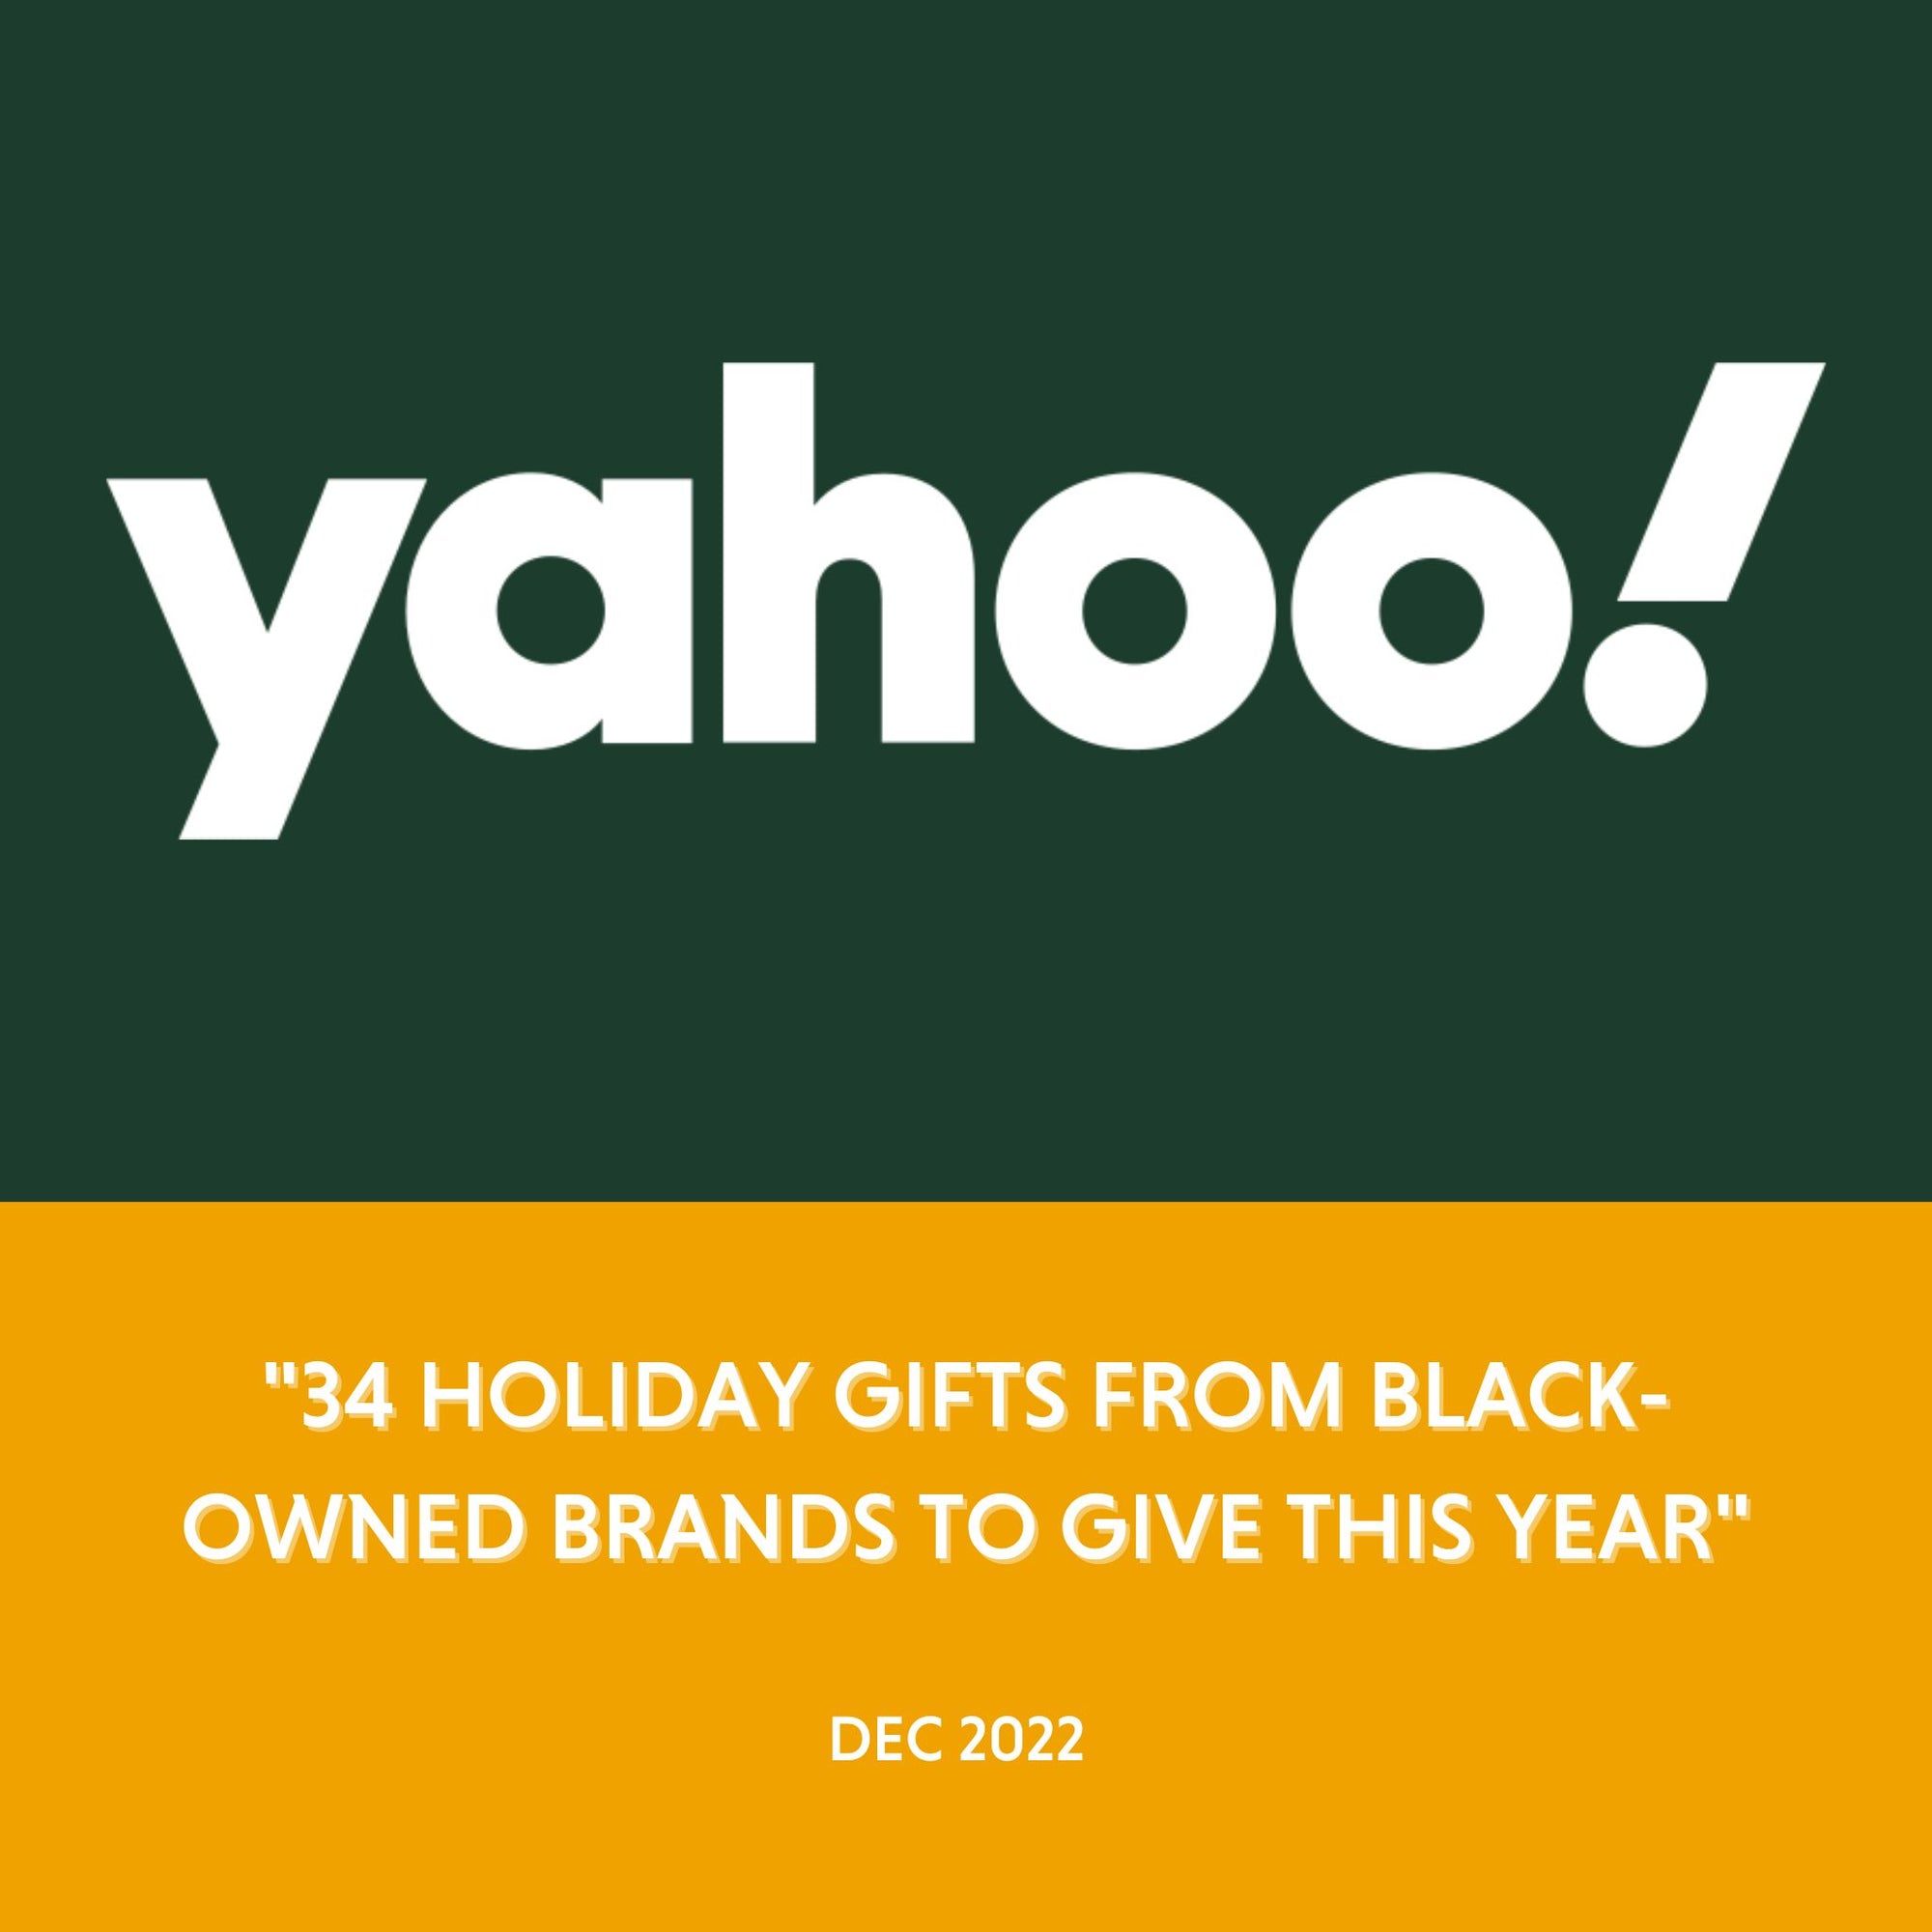 Yahoo - "34 Holiday Gifts From Black-Owned Brands To Give This Year" - Dec 2022